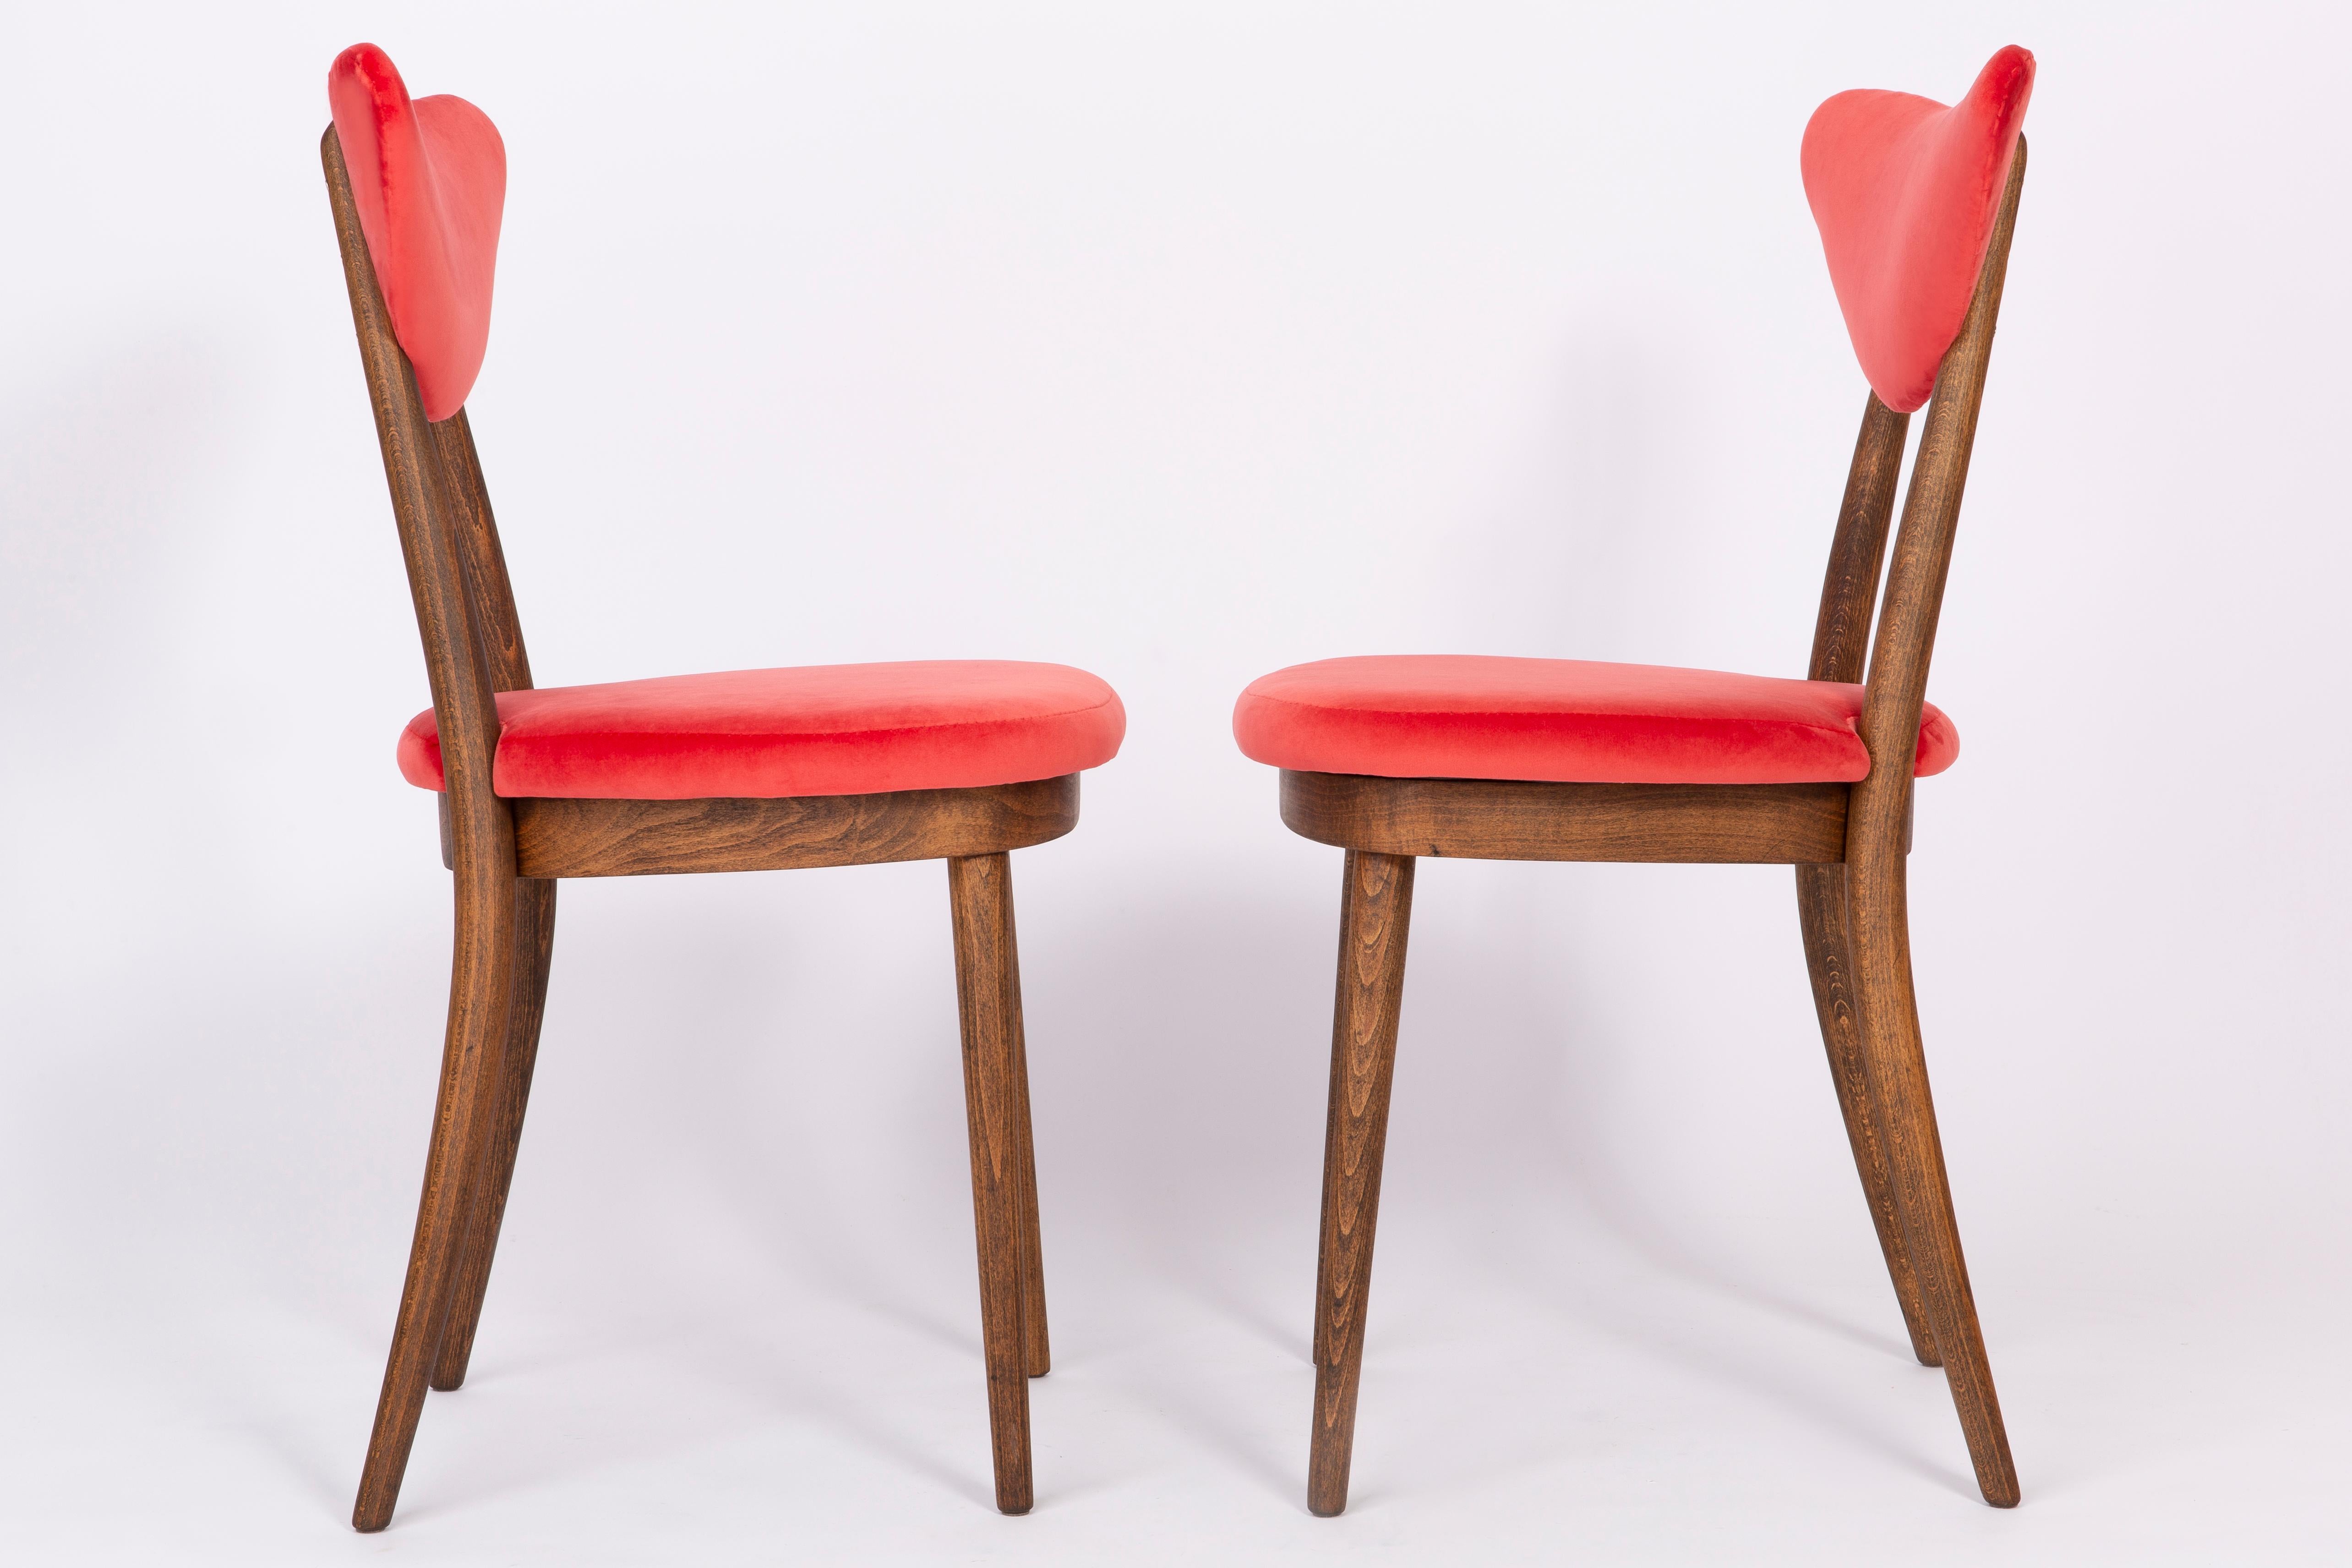 Hand-Crafted Pair of Red Heart Chairs, Poland, 1960s For Sale